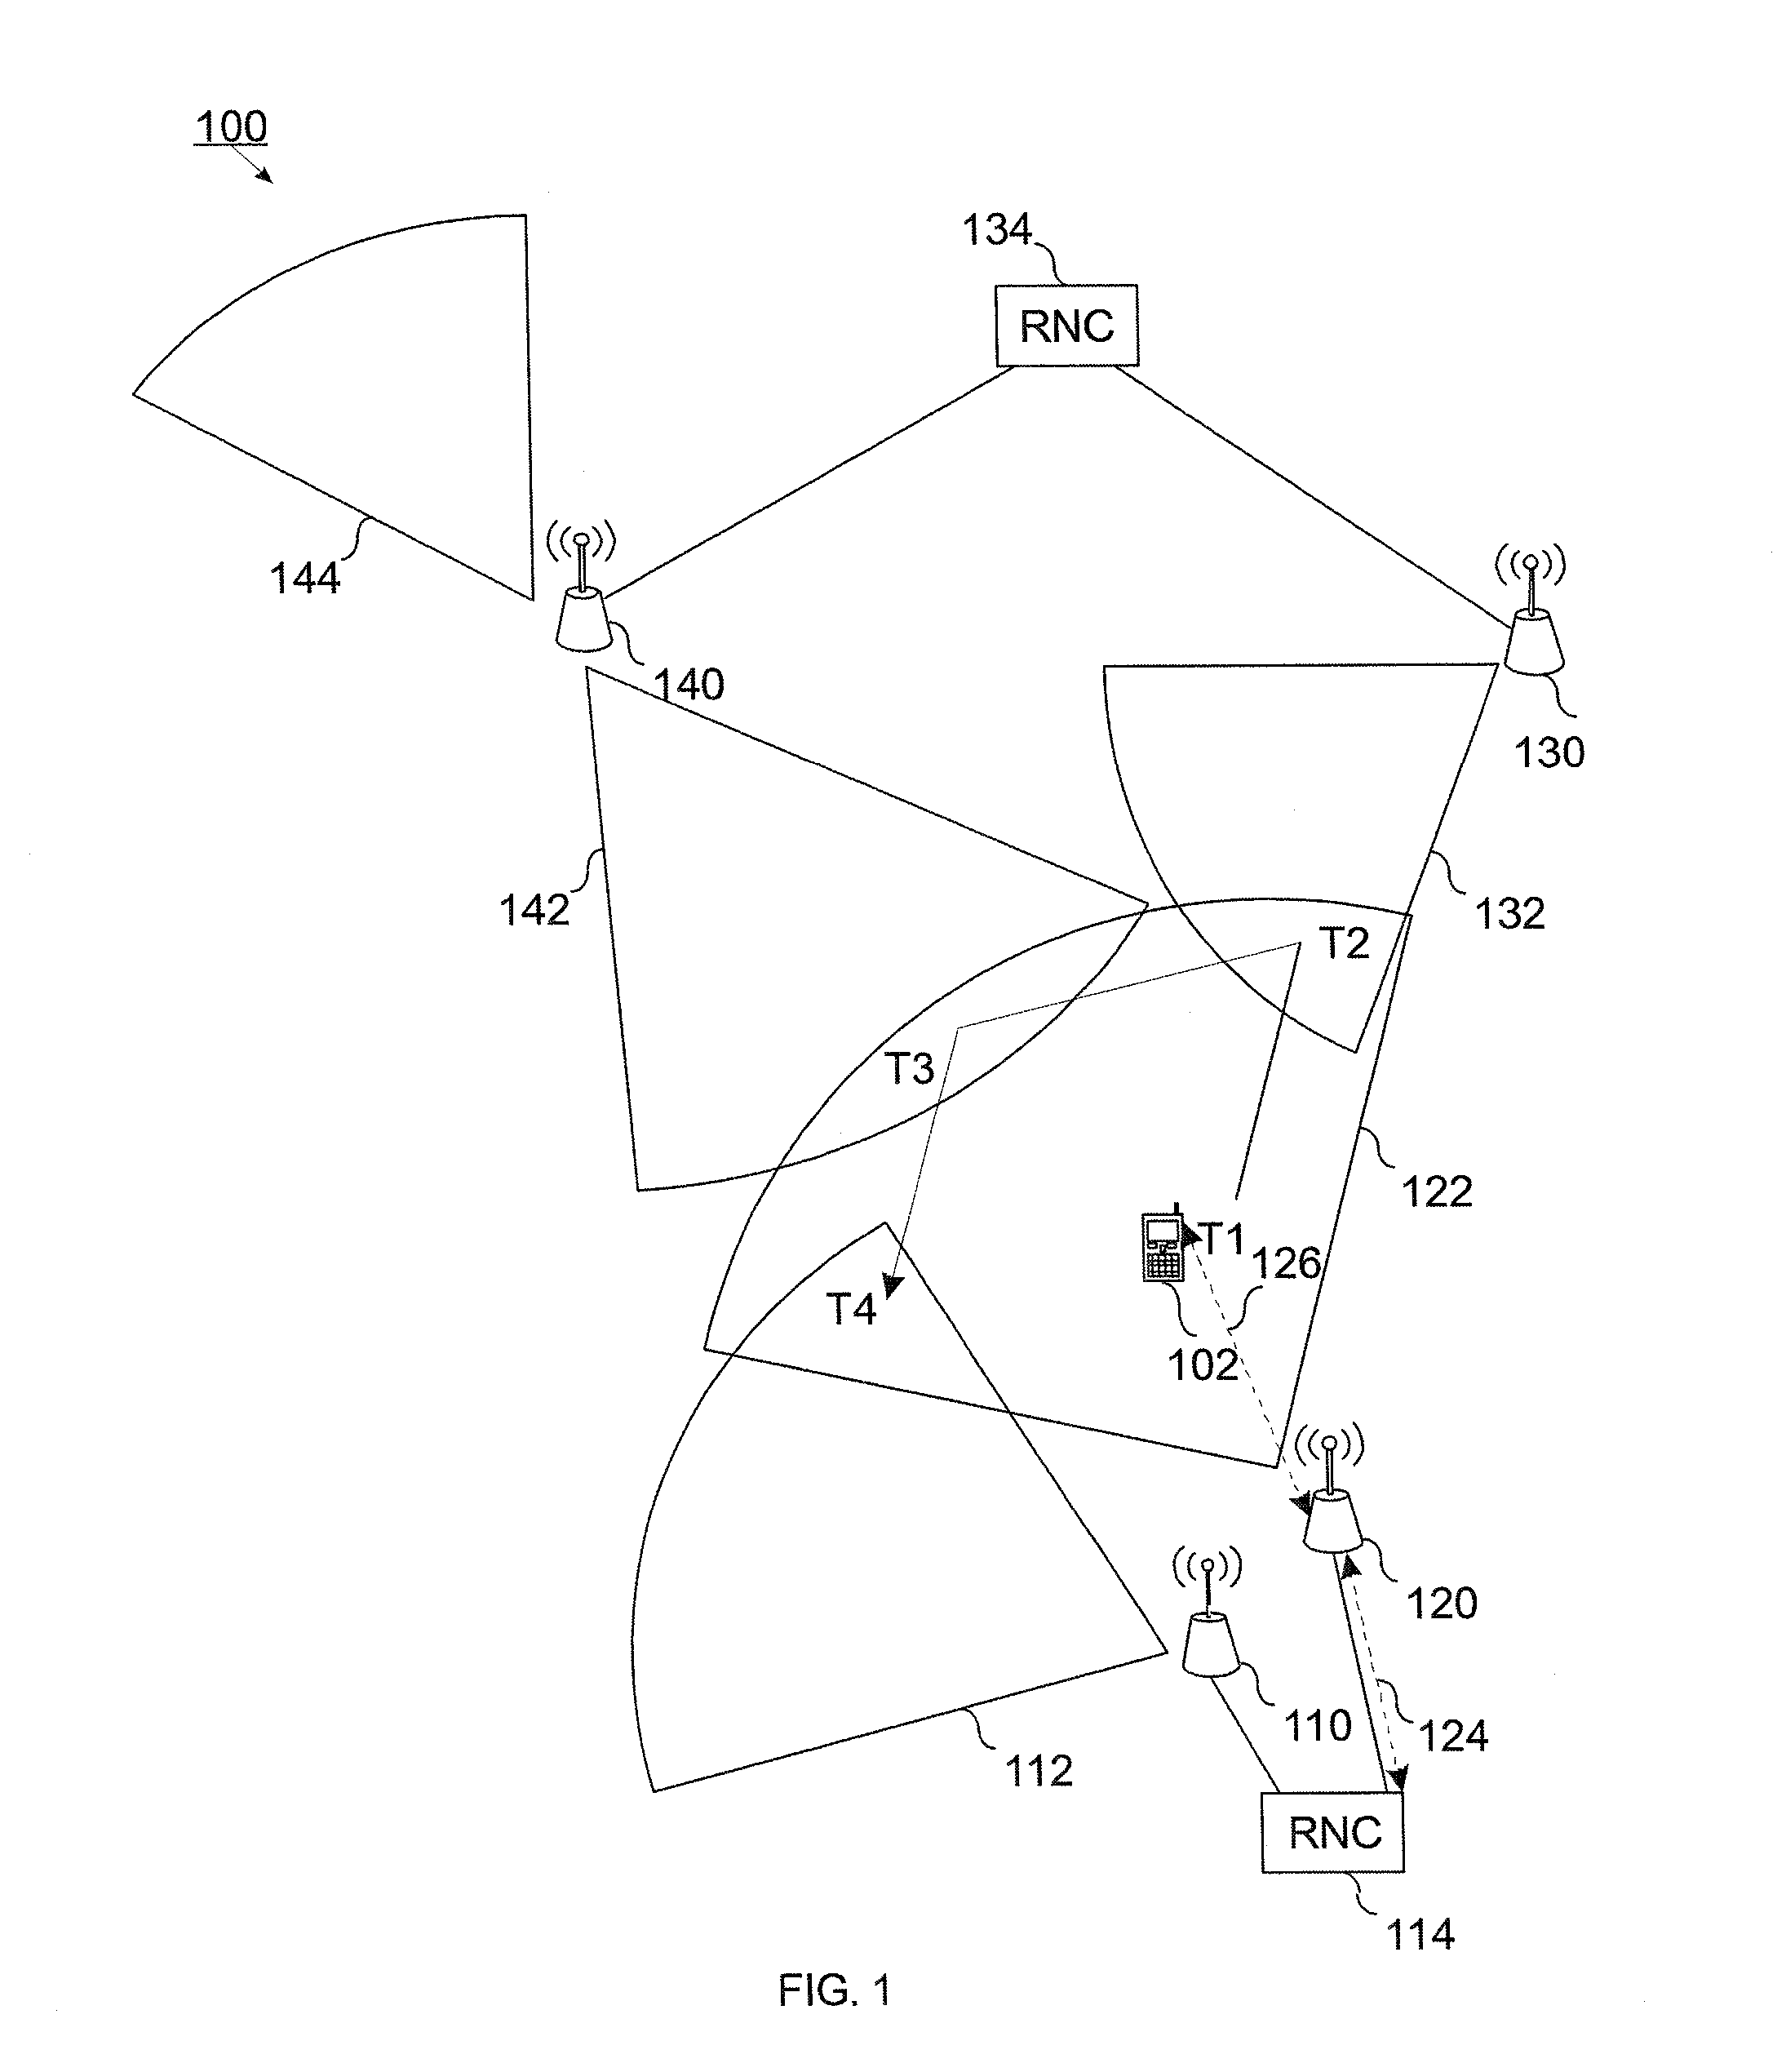 Method for Automatic Neighbor Cell Relation Reporting in a Mobile Communication System